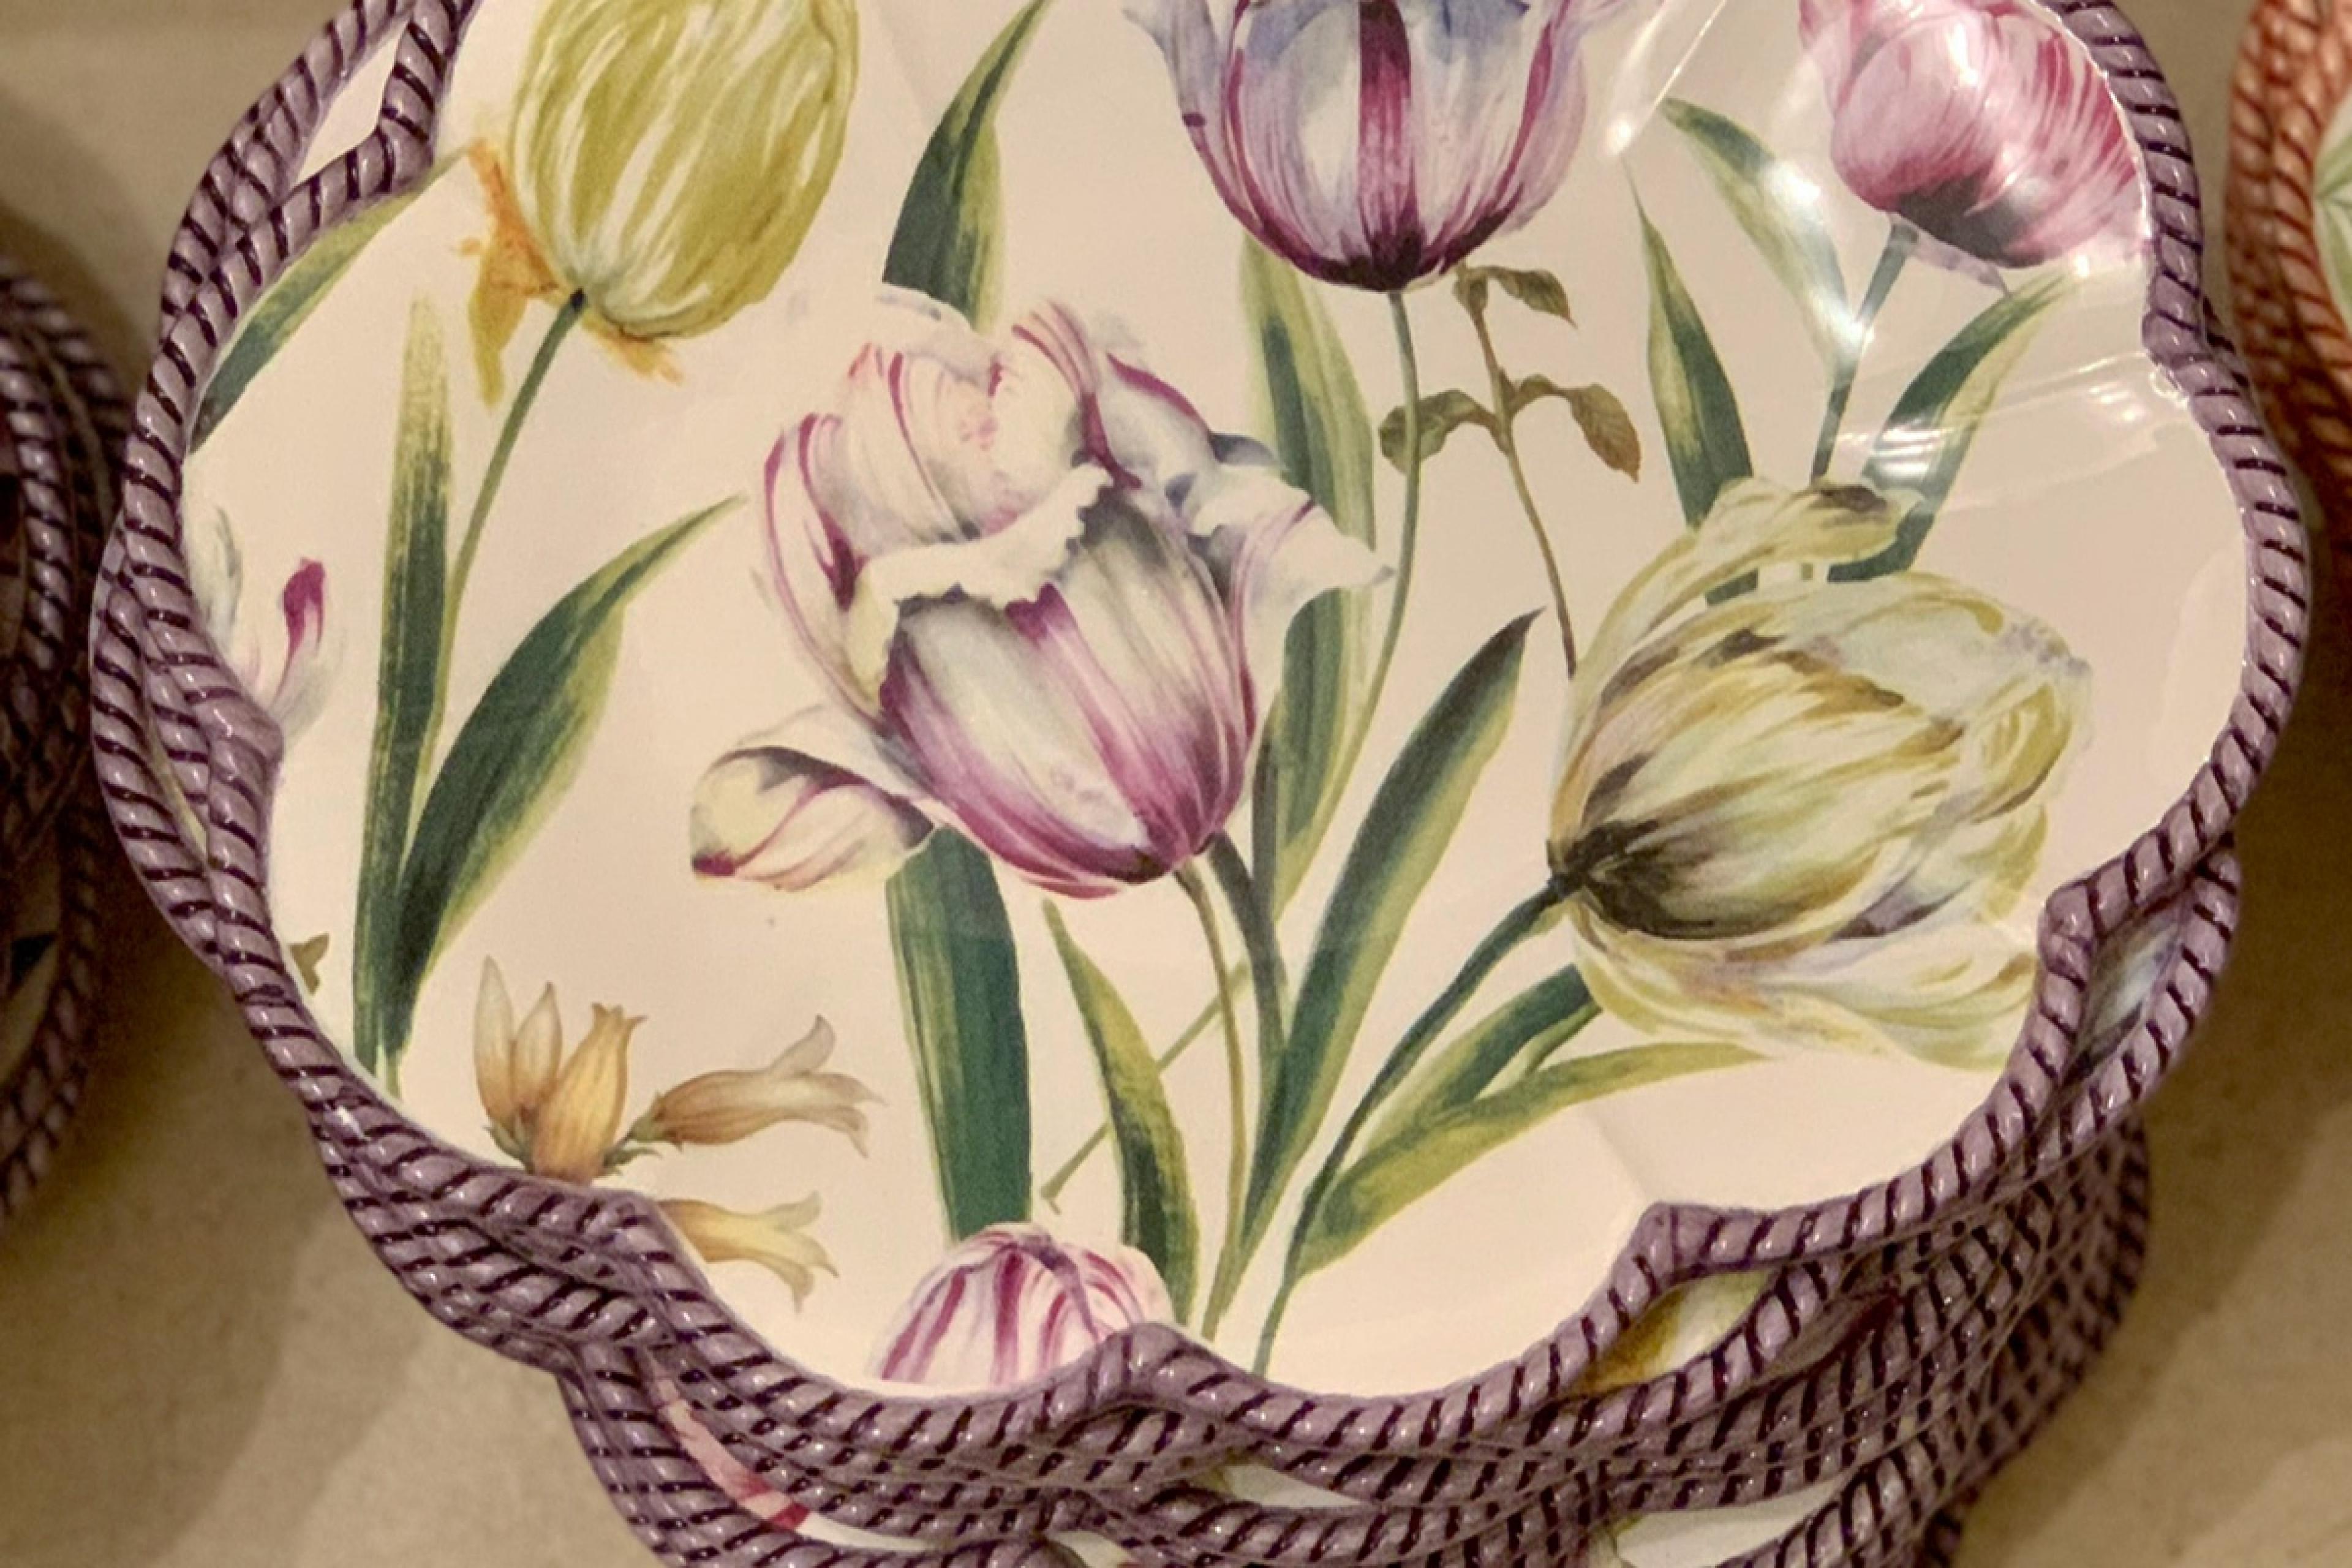 detail of ceramic plates with tulips painted on them